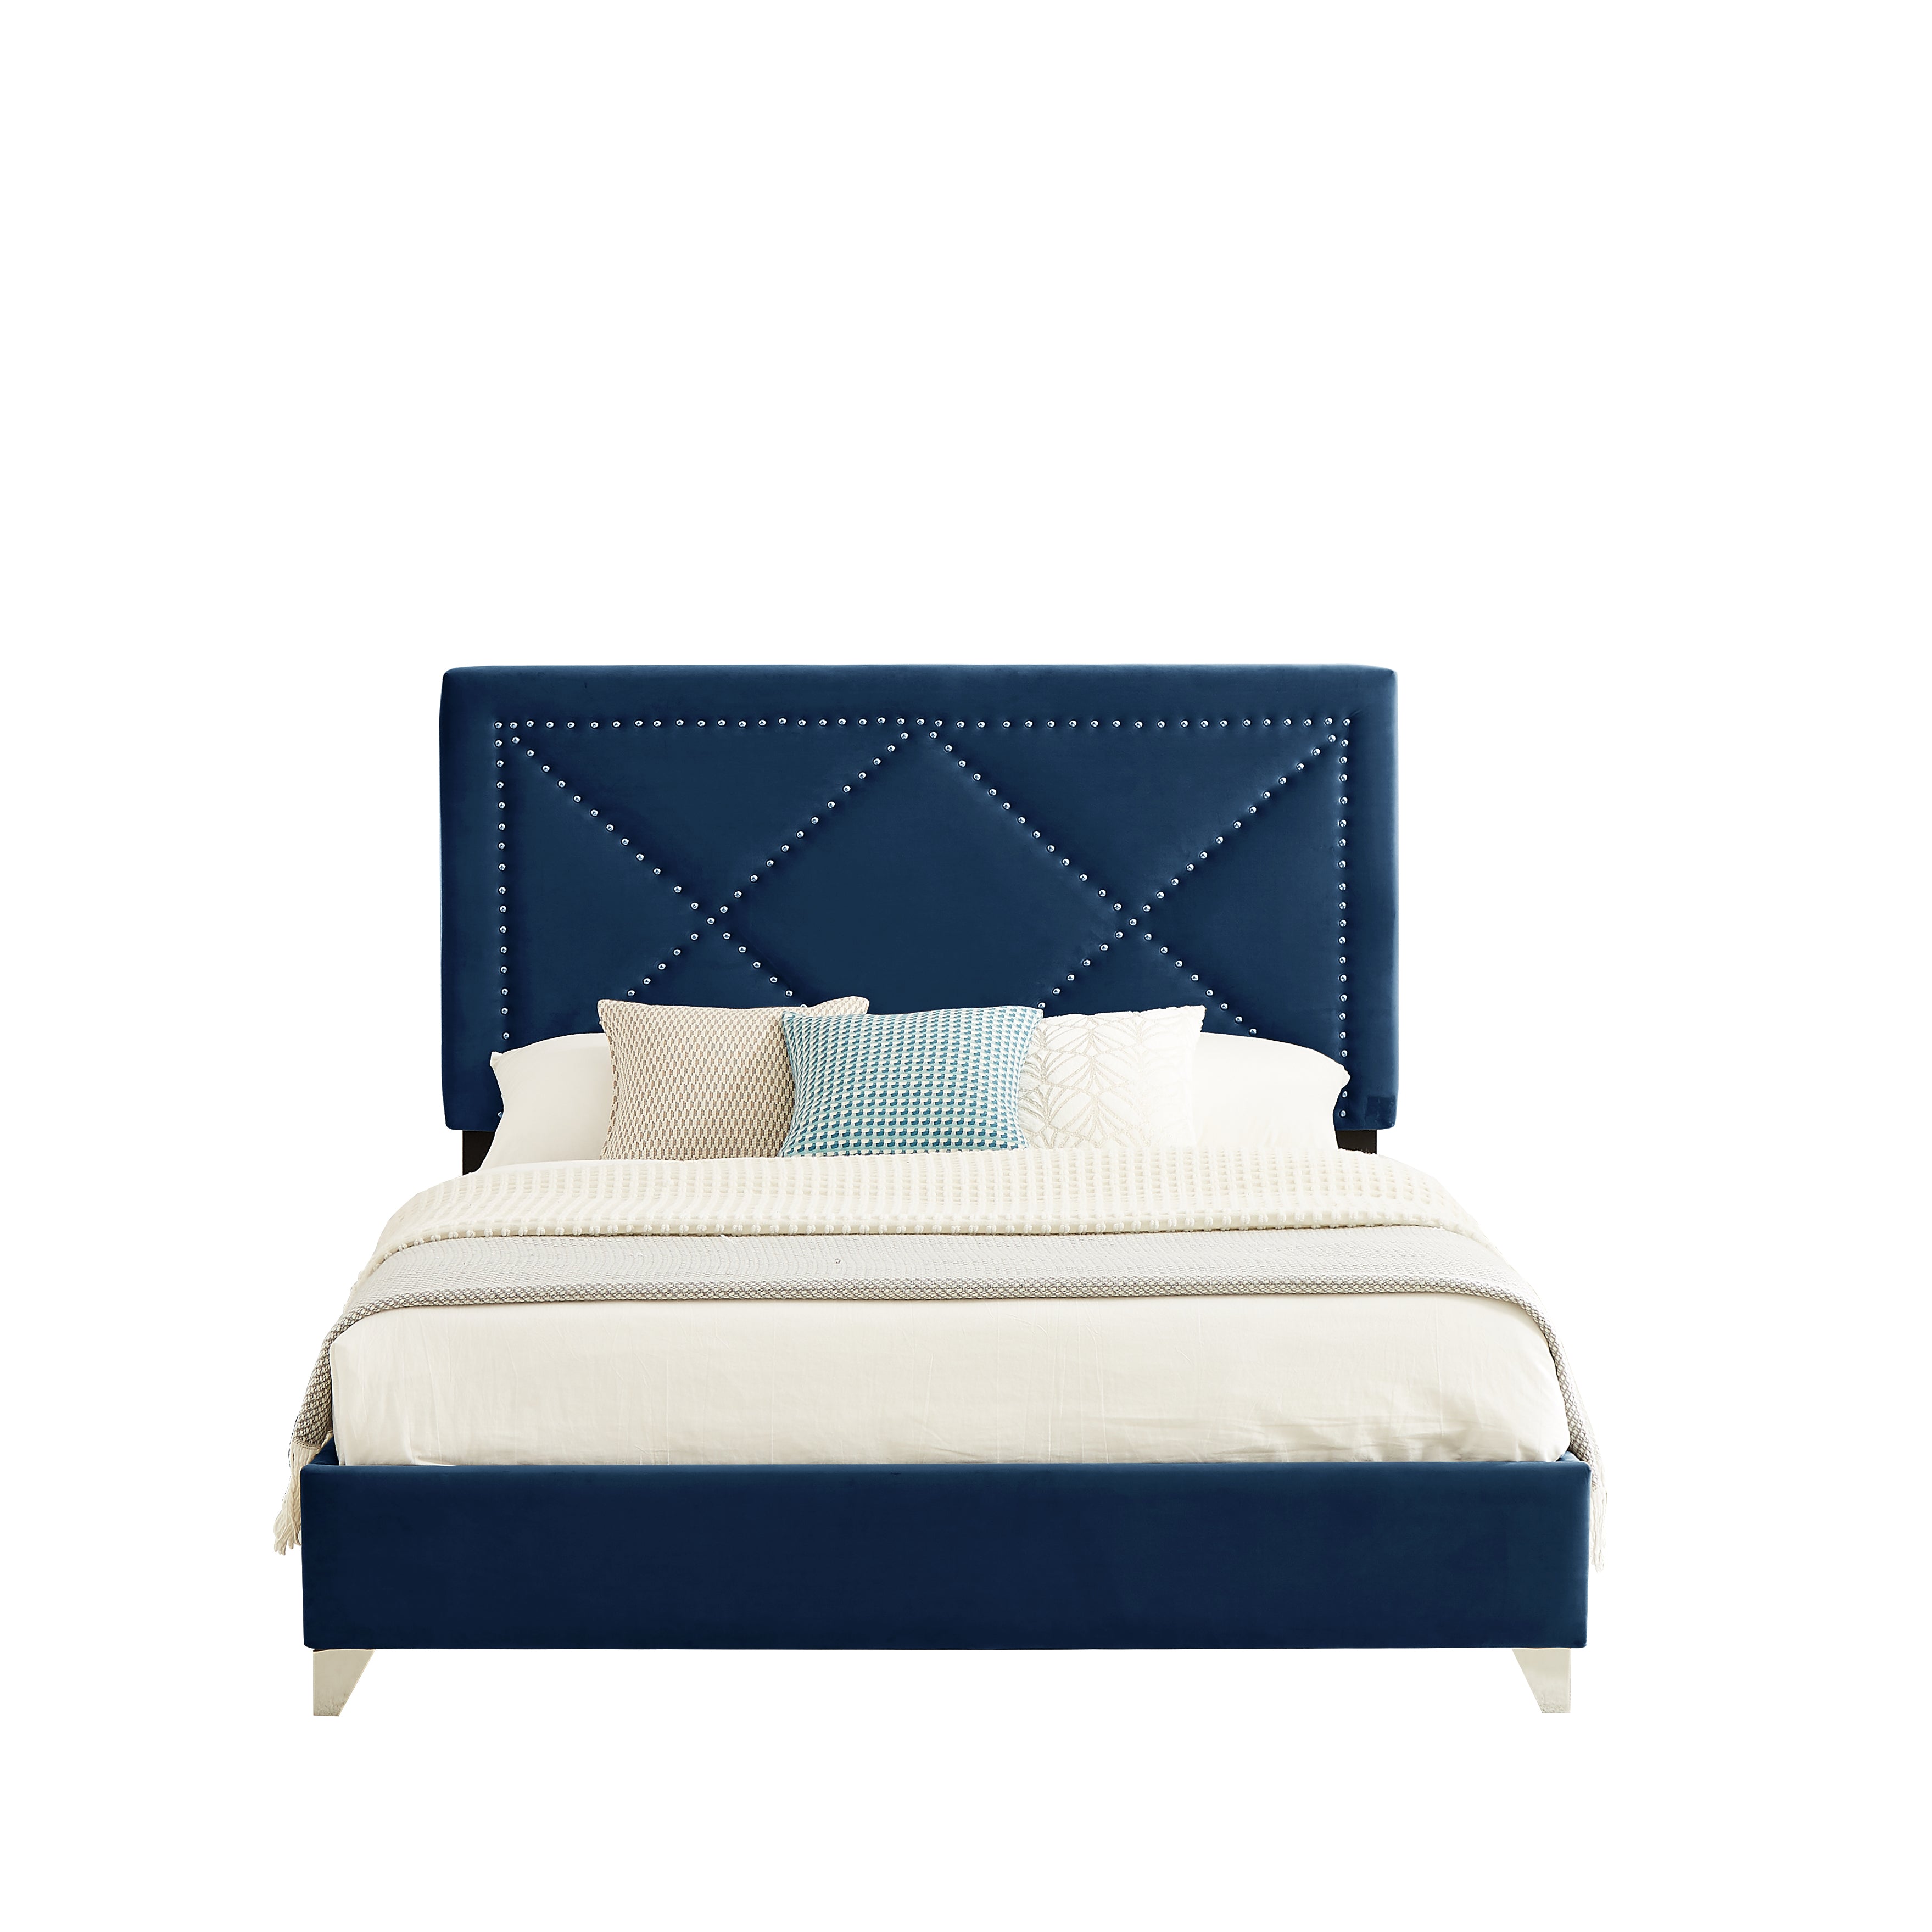 ZNTS B109 Queen bed .Beautiful brass studs adorn the headboard, strong wooden slats + metal legs with W130254230